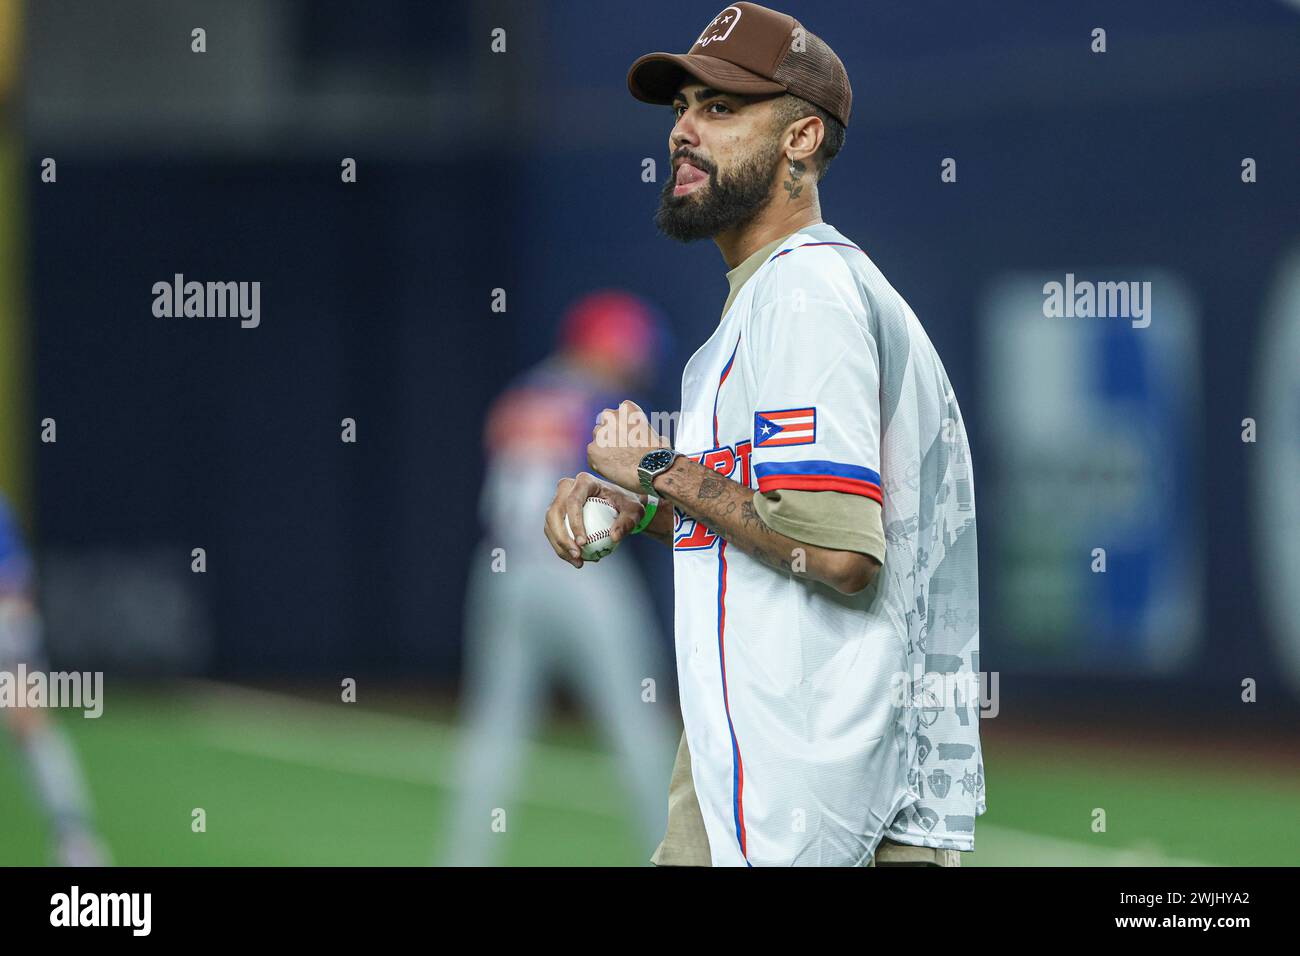 MIAMI, FLORIDA - FEBRUARY 2: Jay Wheeler José Ángel López Martínez, known as Jay Wheeler, is a Puerto Rican singer, songwriter, producer and dancer.    ,during a game between Mexico and Puerto Rico at loanDepot park as part of Serie del Caribe 2024 on February 2, 2024 in Miami, Florida. (Photo by Luis Gutierrez/Norte Photo) Stock Photo